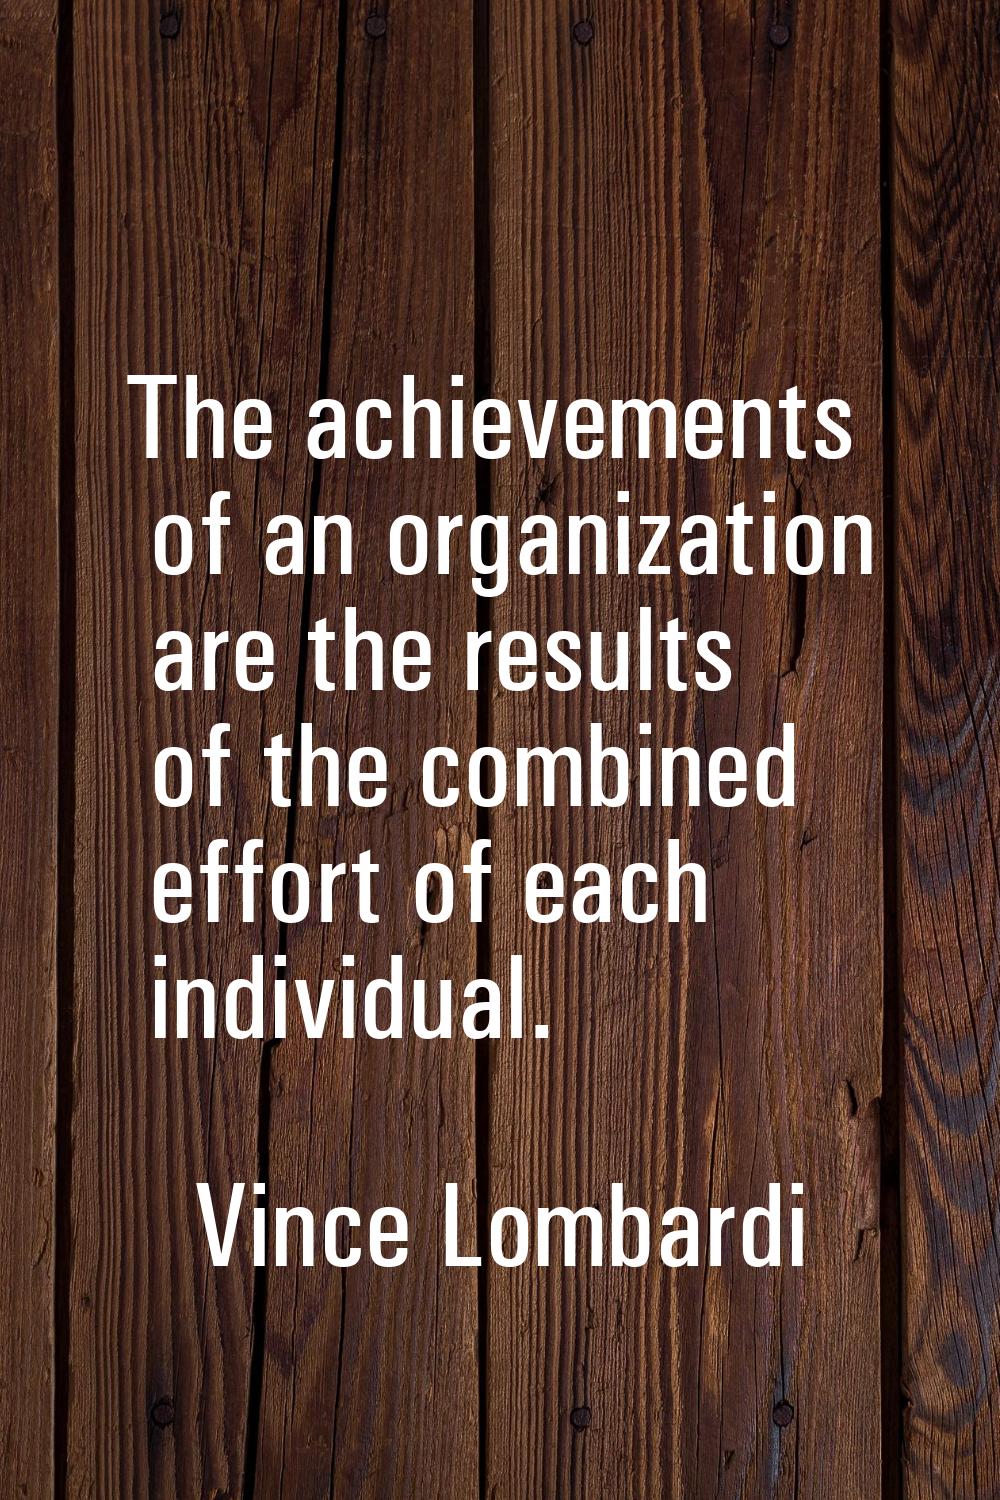 The achievements of an organization are the results of the combined effort of each individual.